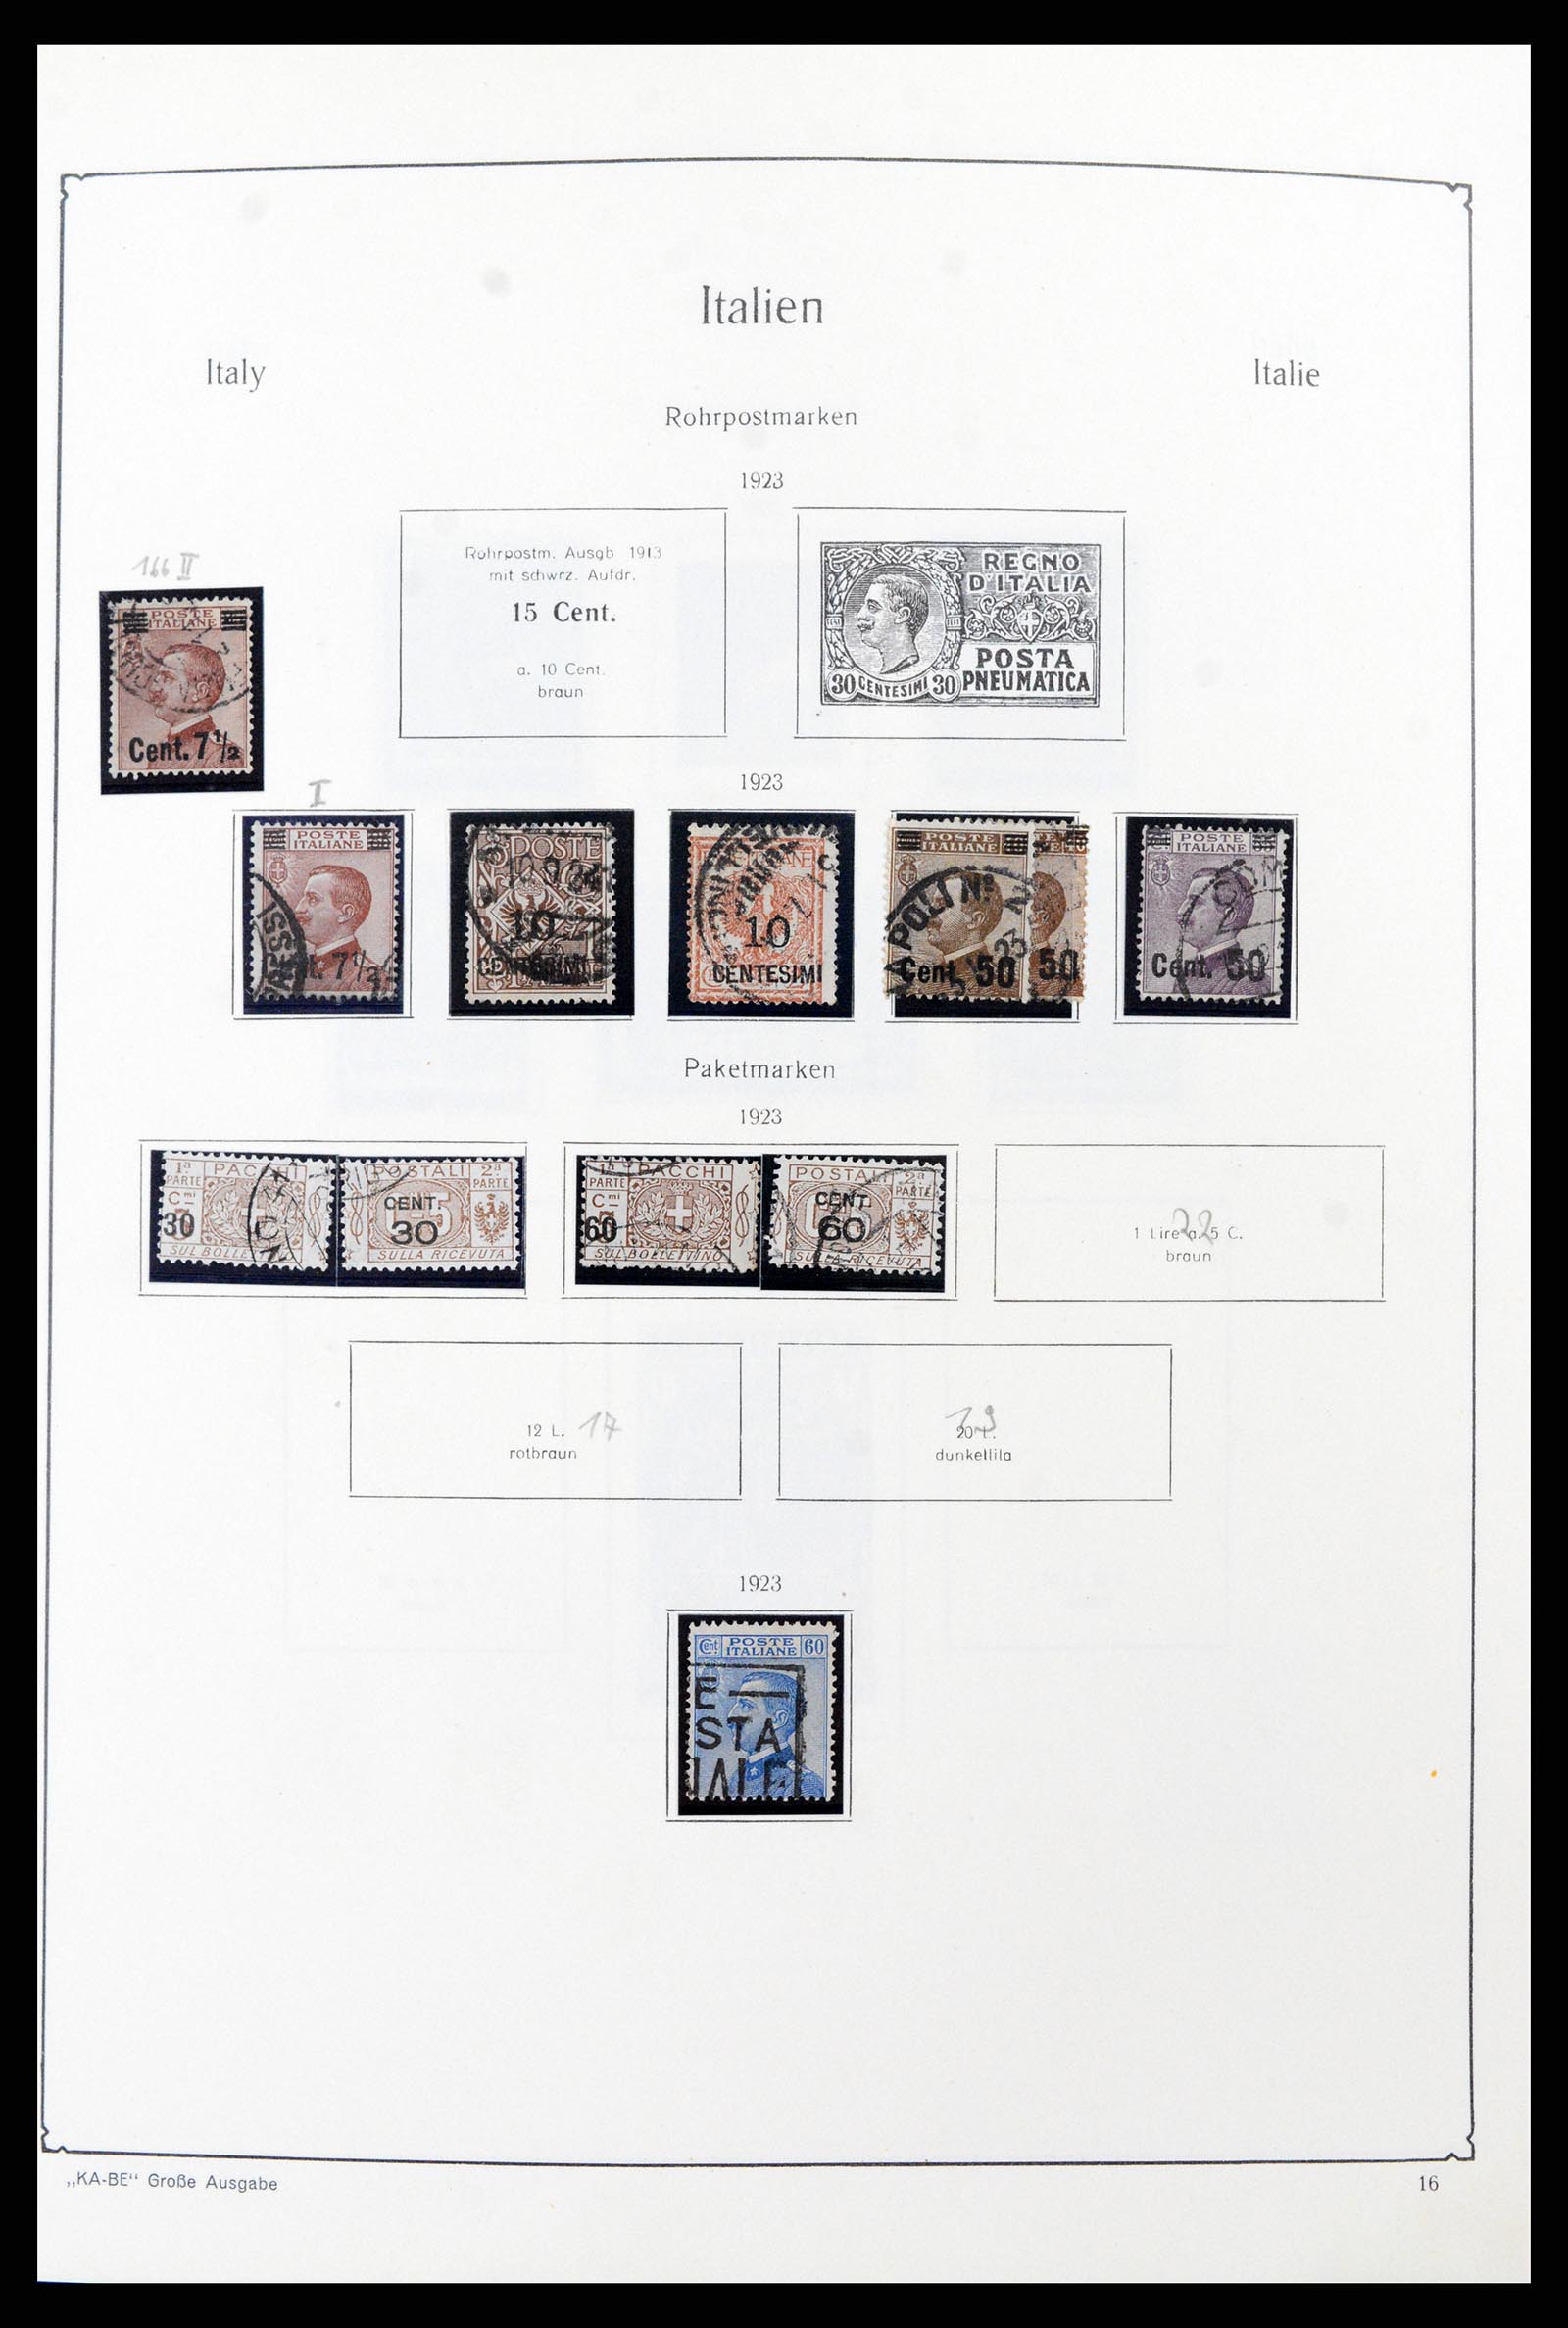 37605 031 - Stamp collection 37605 Italy and States 1855-1974.